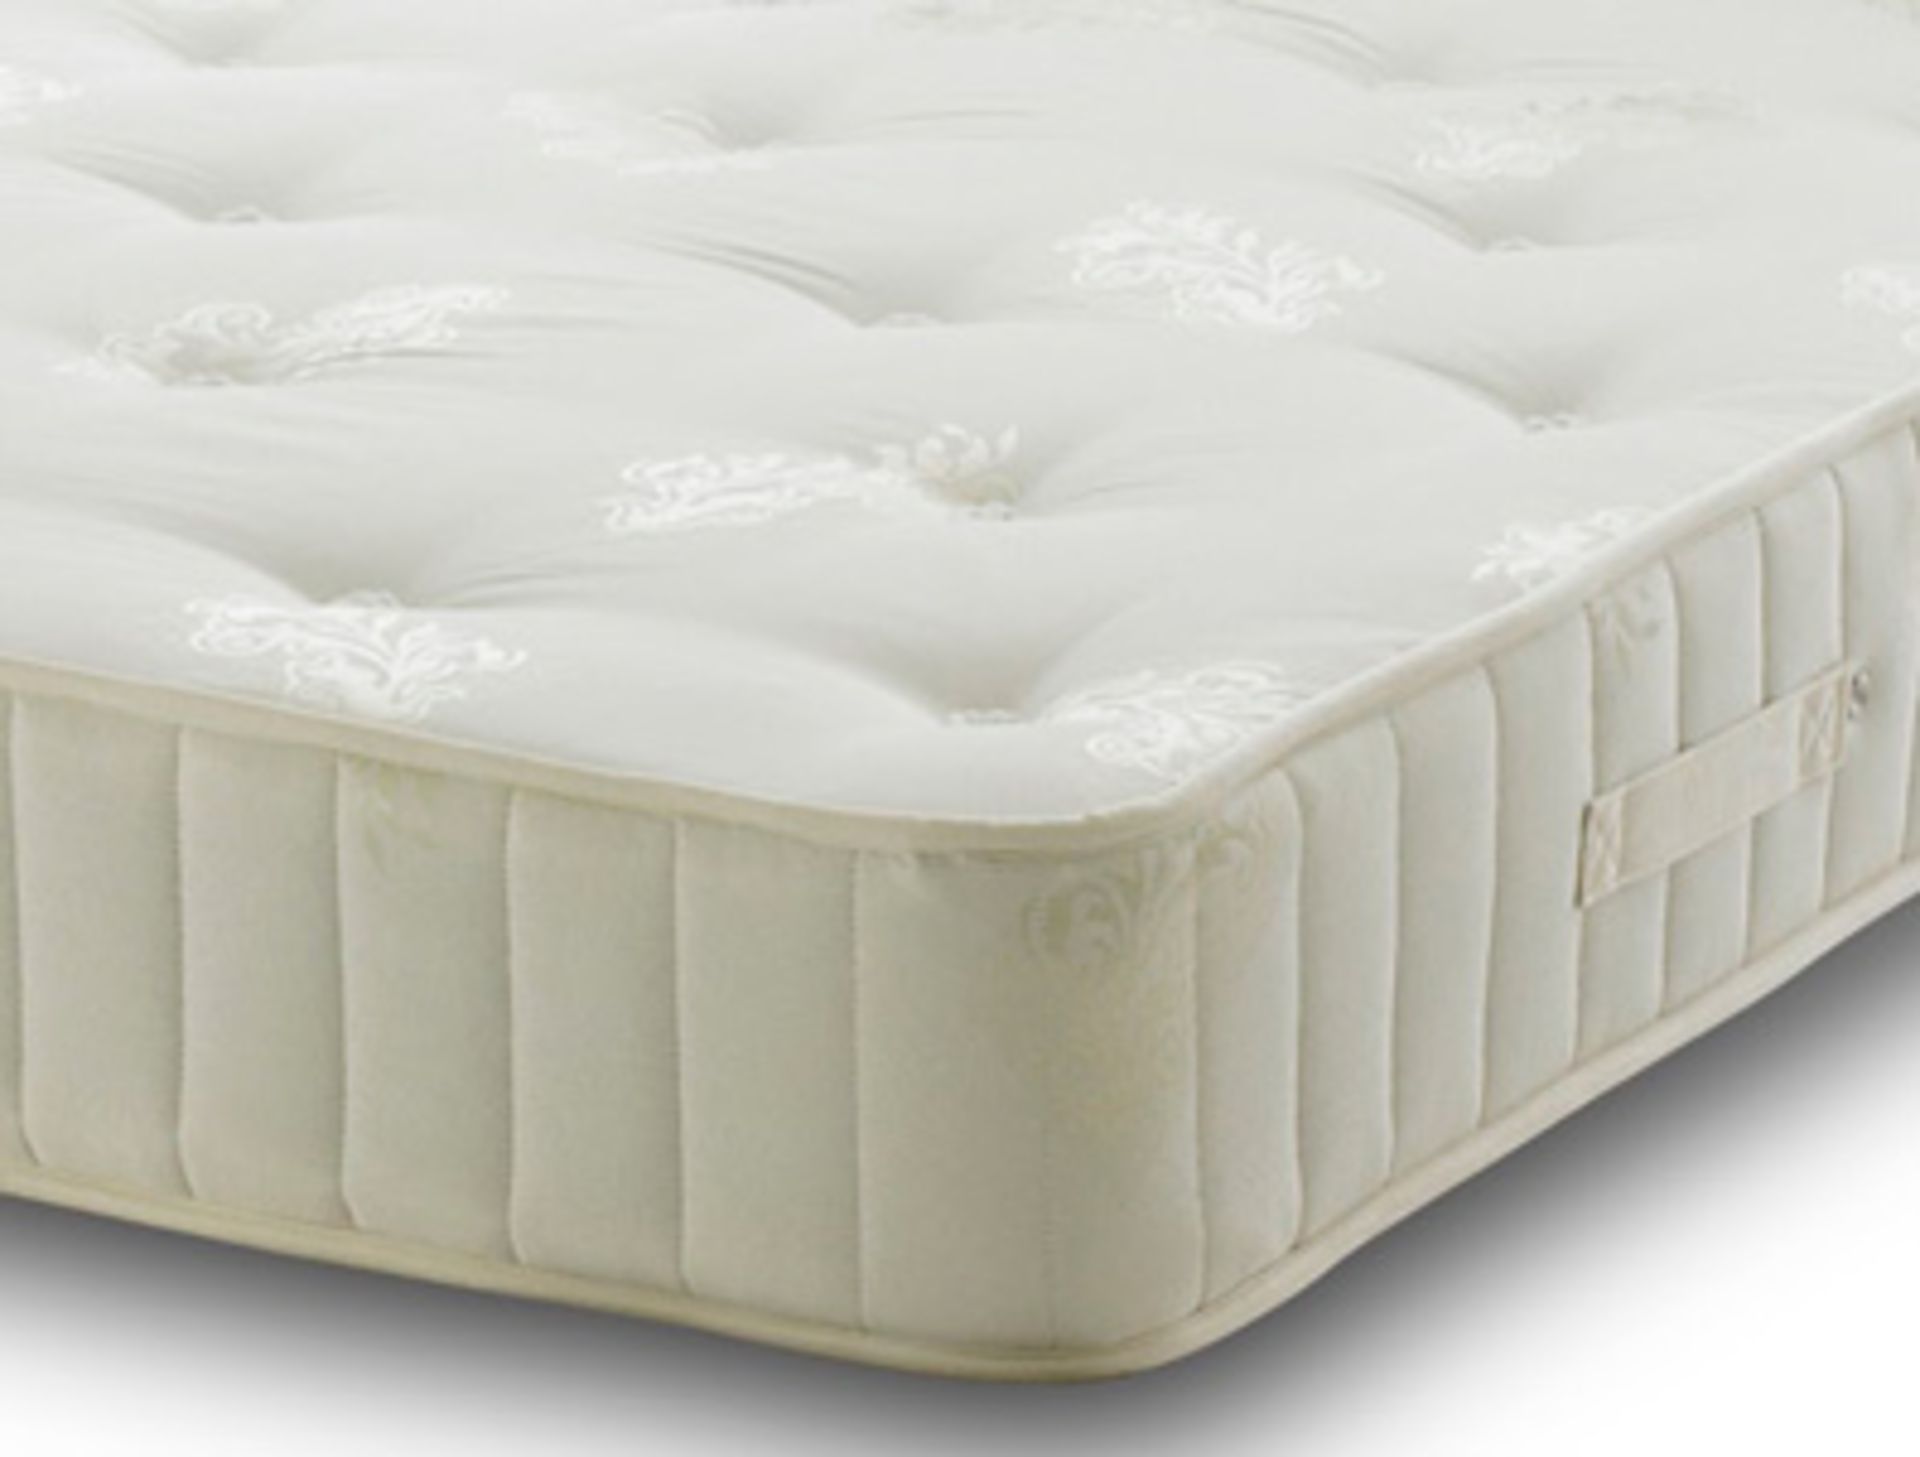 1 GRADE A BAGGED BEDMASTER ORTHO CLASSIC MATTRESS